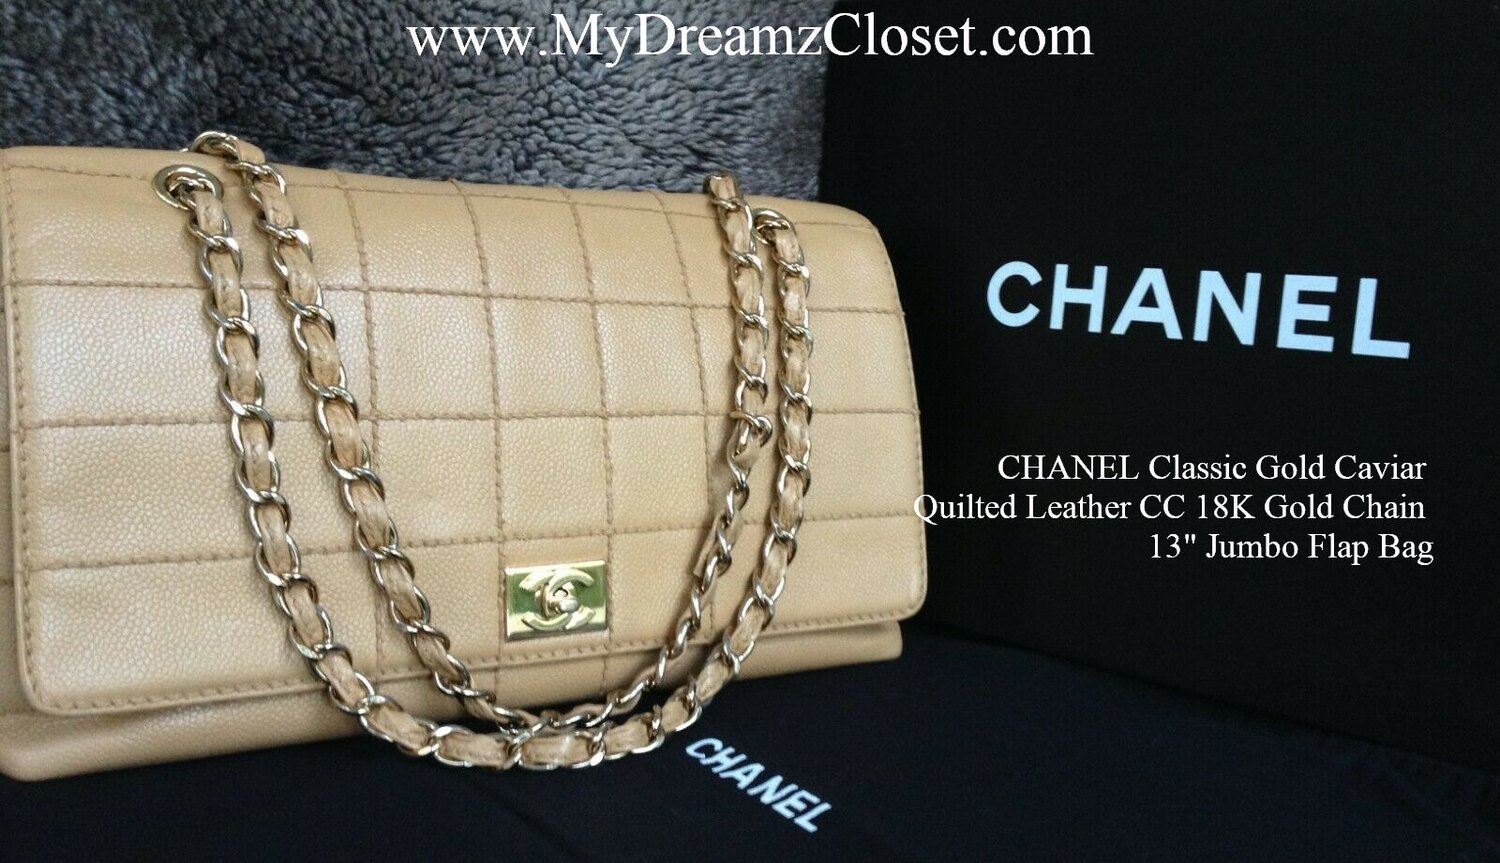 CHANEL Classic Gold Caviar Quilted Leather CC 18K Gold Chain 13